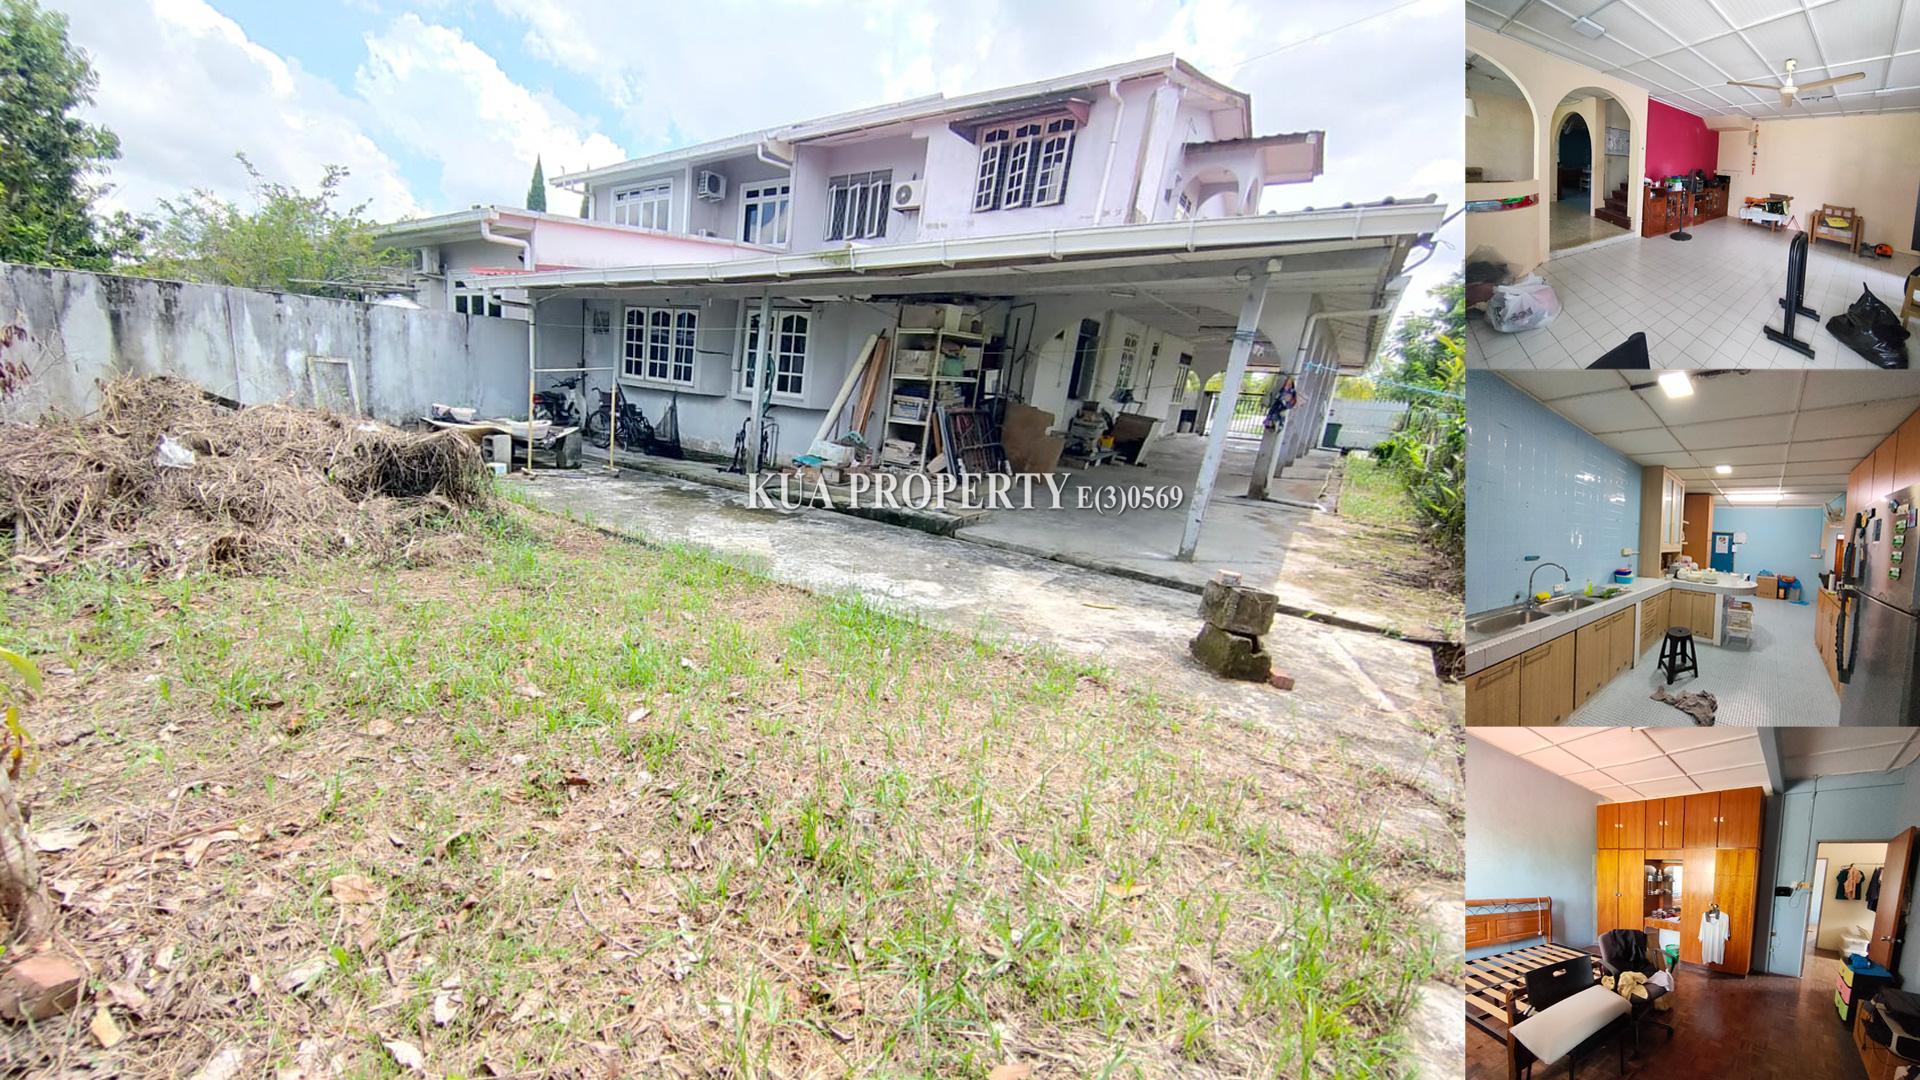 Double Storey Semi-D House For Sale! at Capital Garden, Kuching